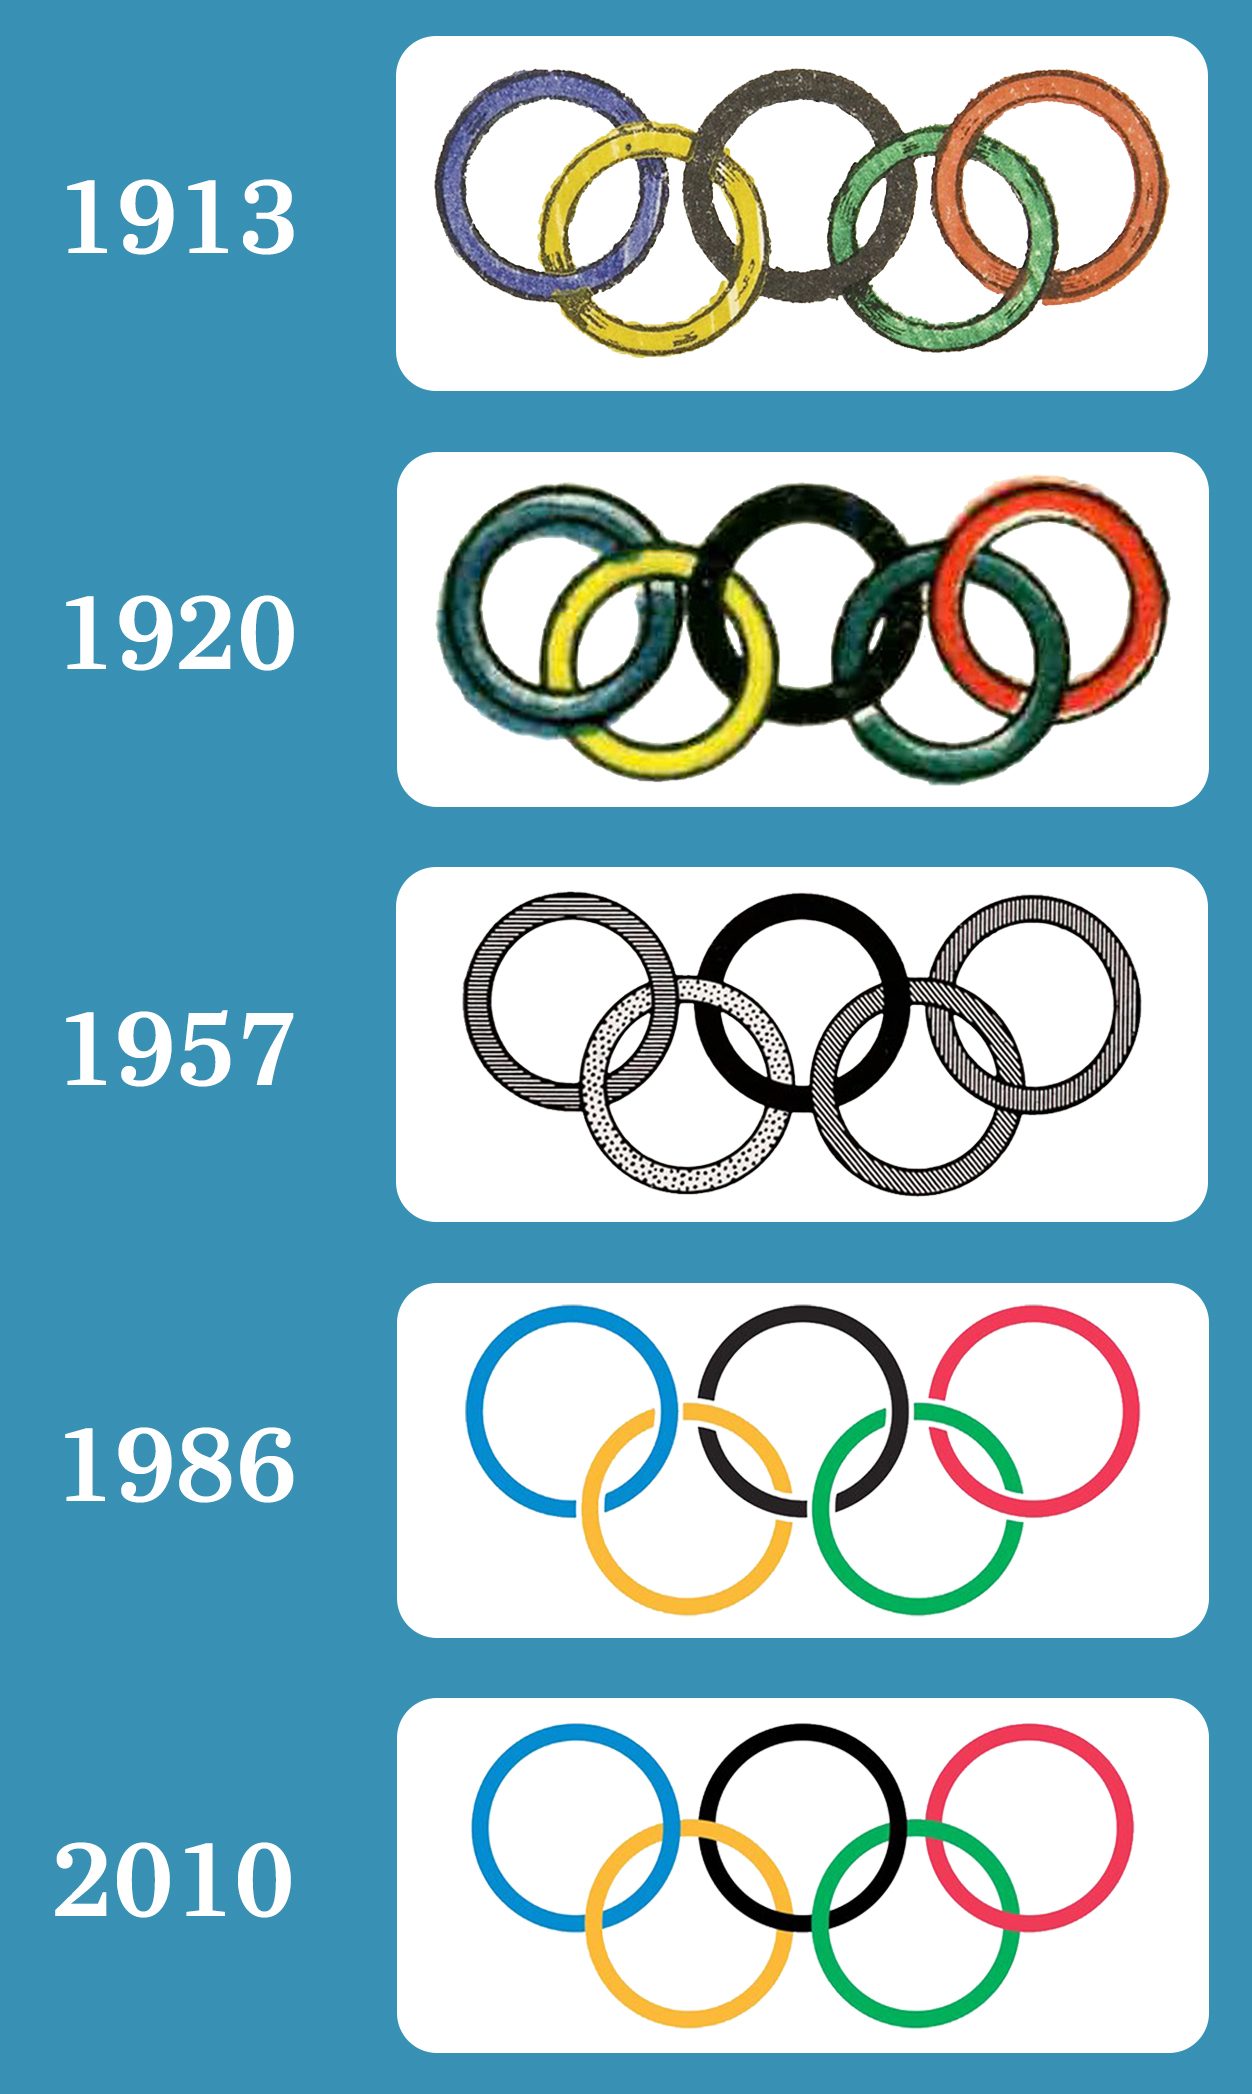 infographic showing the evolution of the Olympic Rings; labeled photos of the rings from 1913, 1920, 1957, 1986, and 2010